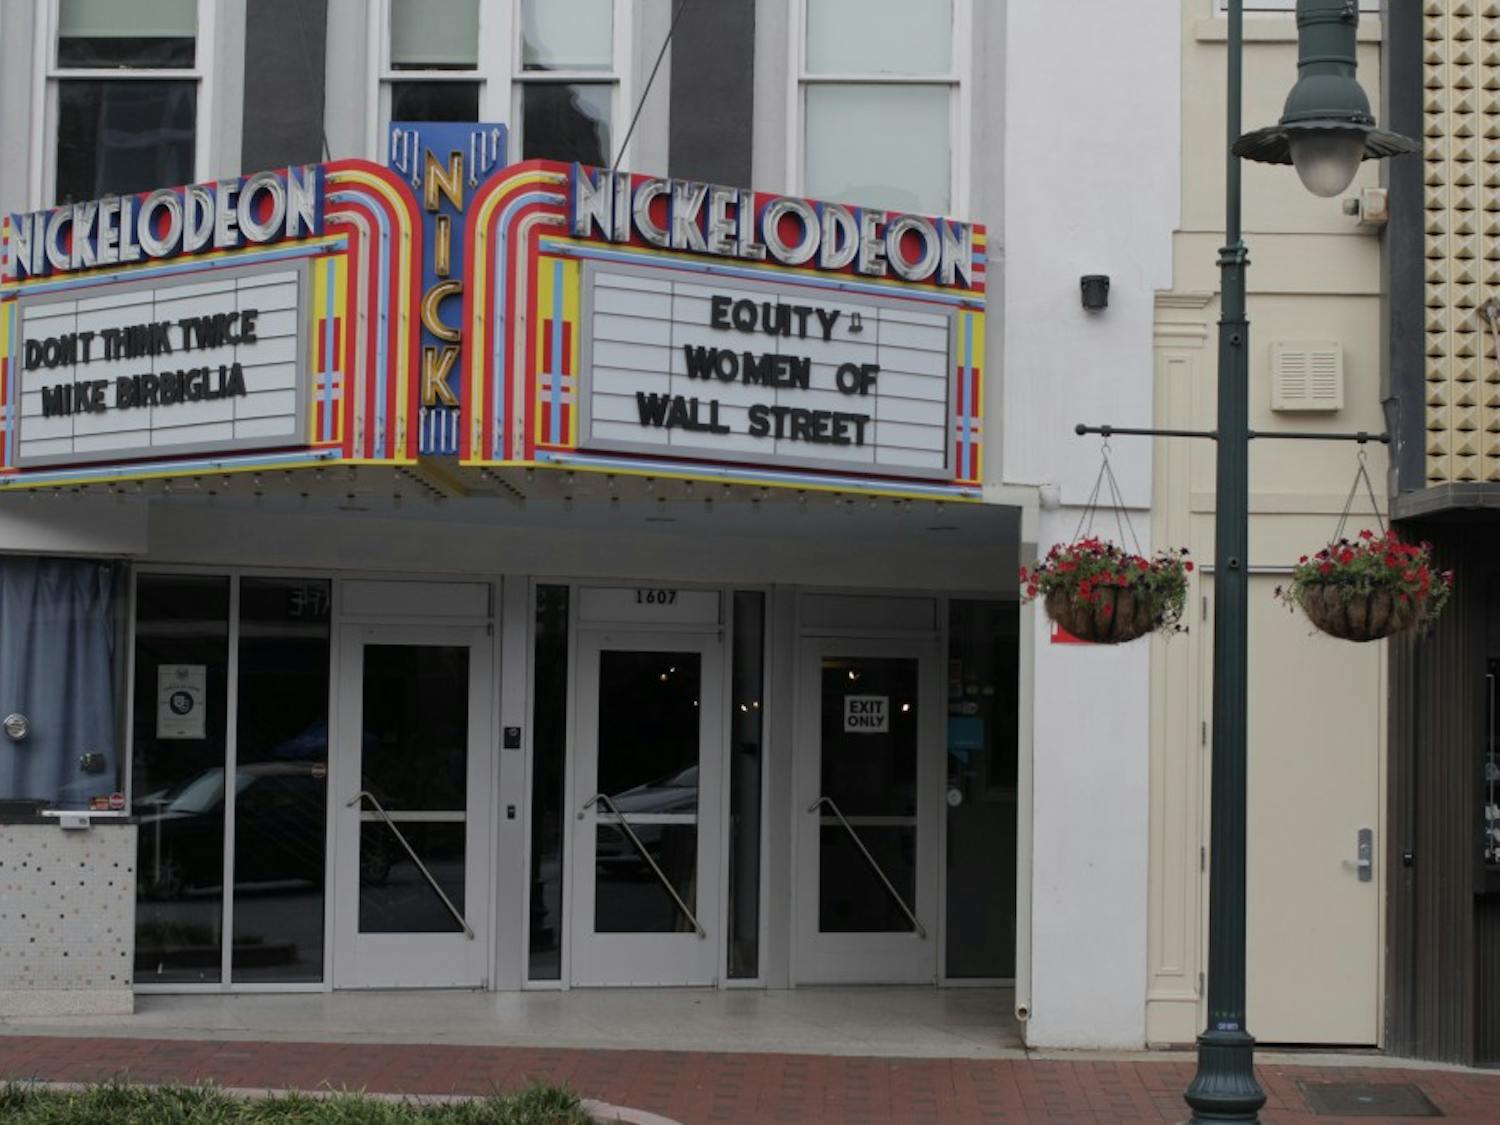 The Nickelodeon Theatre on Main Street shows a variety of independent films and holds various events, such as the Indie Grits Film Festival.&nbsp;